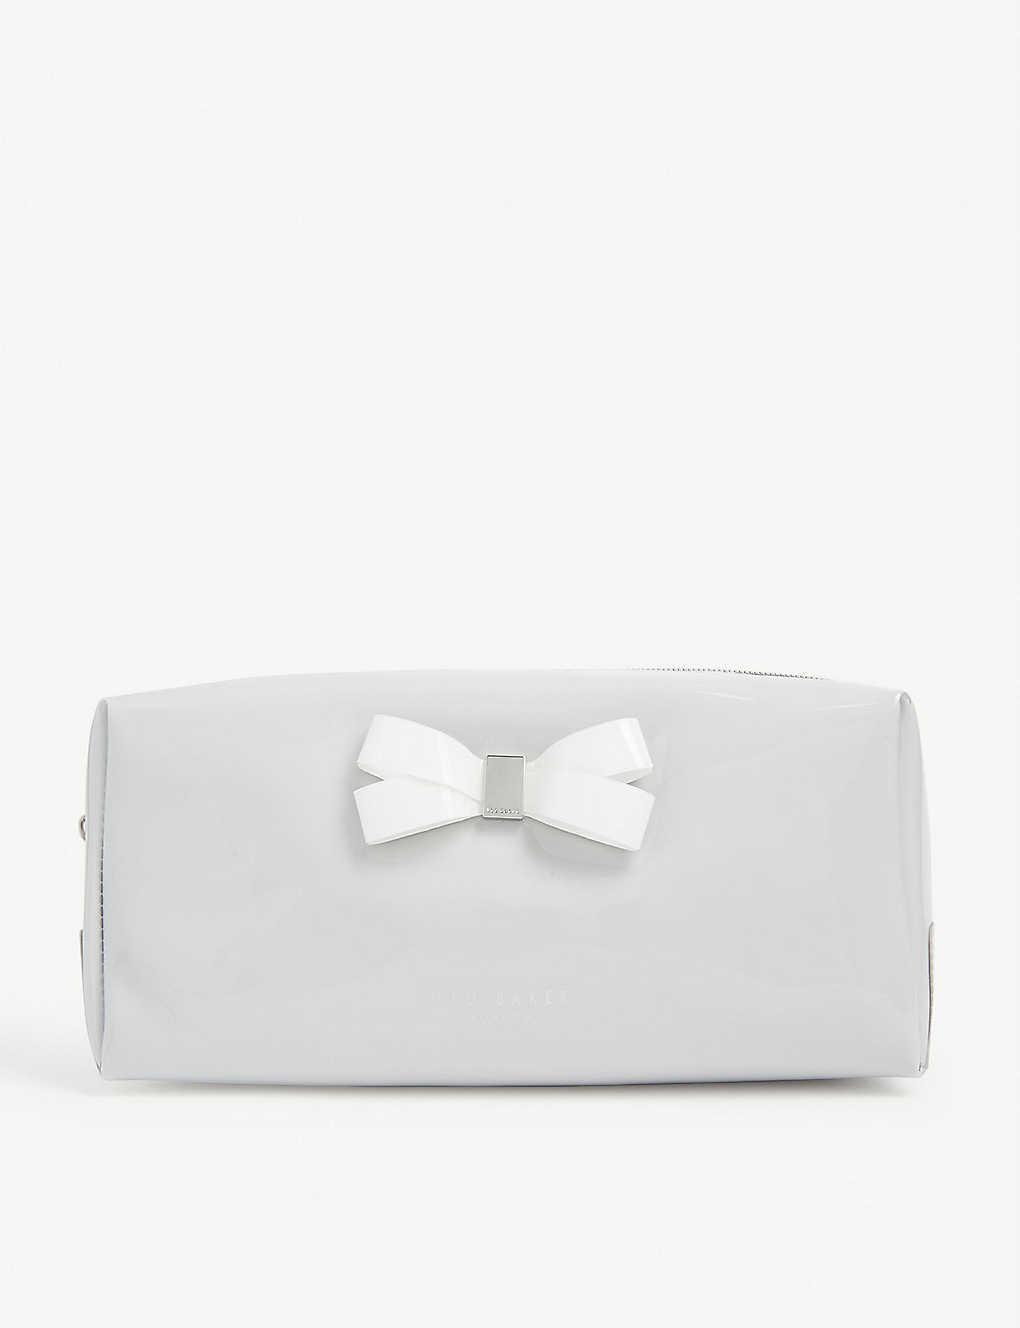 Ted Baker Grey Cahira Bow Detail Wash Bag 1 Size in Gray - Lyst